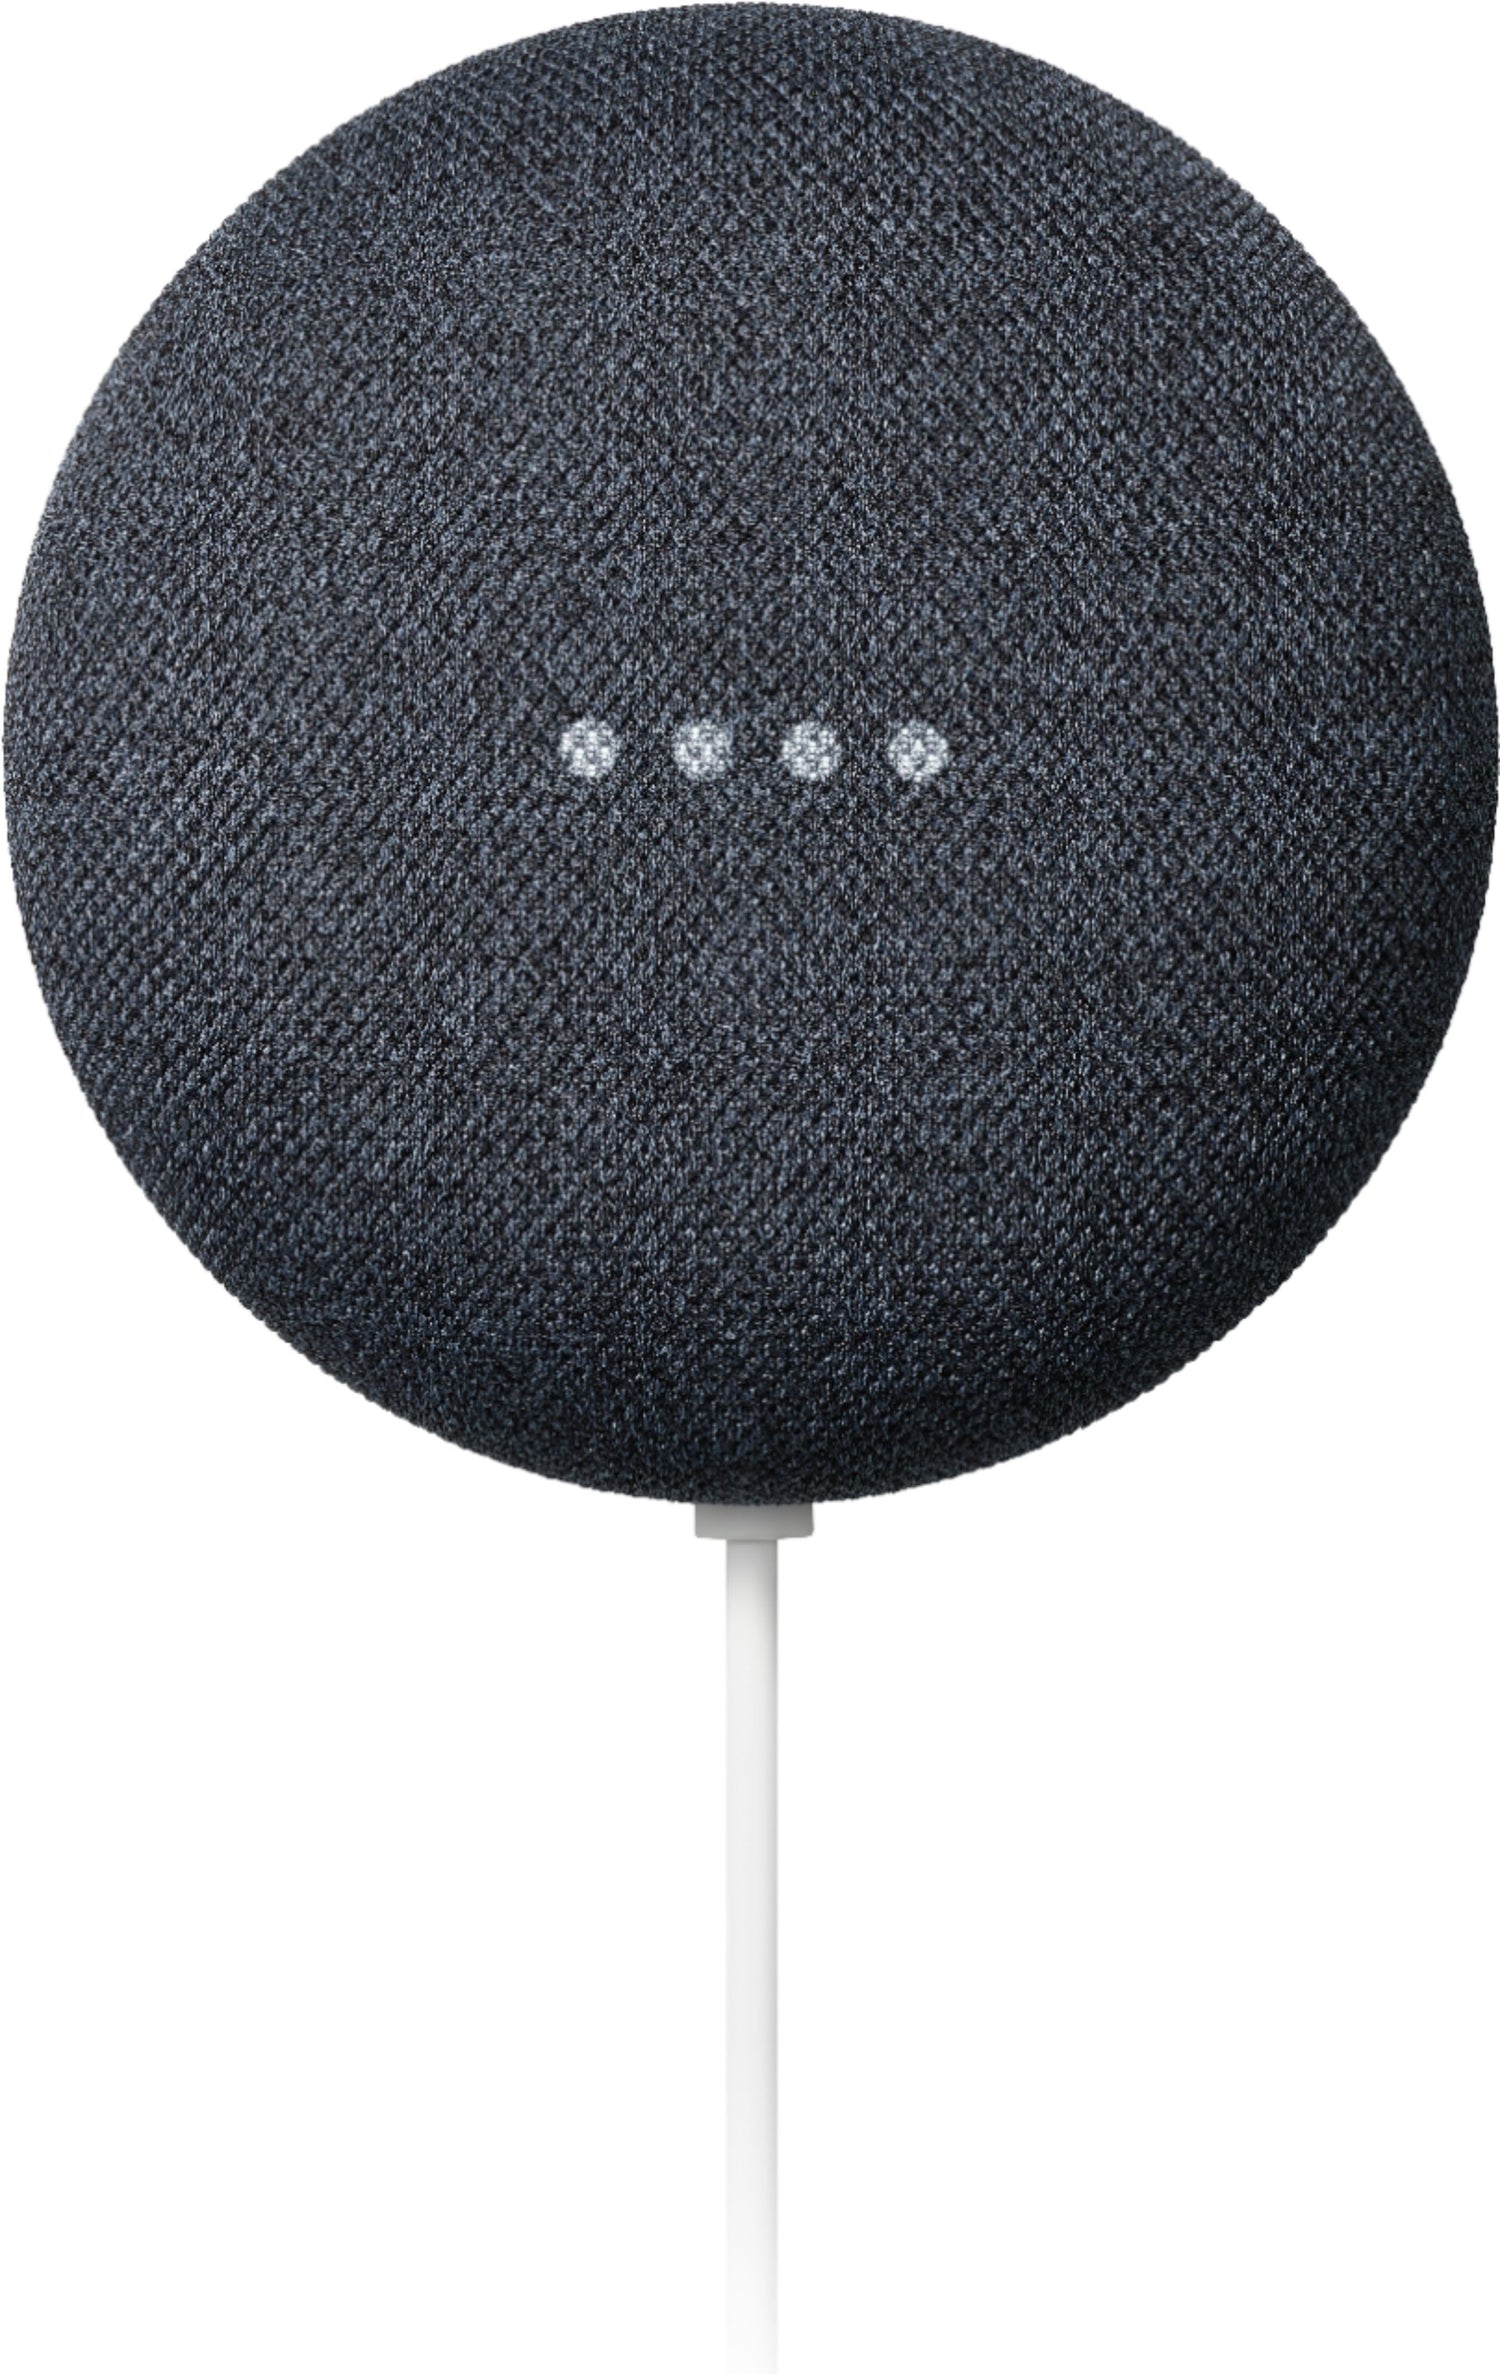 Google Nest Mini 2nd Generation Smart Speaker with Google Assistant - Charcoal (New)